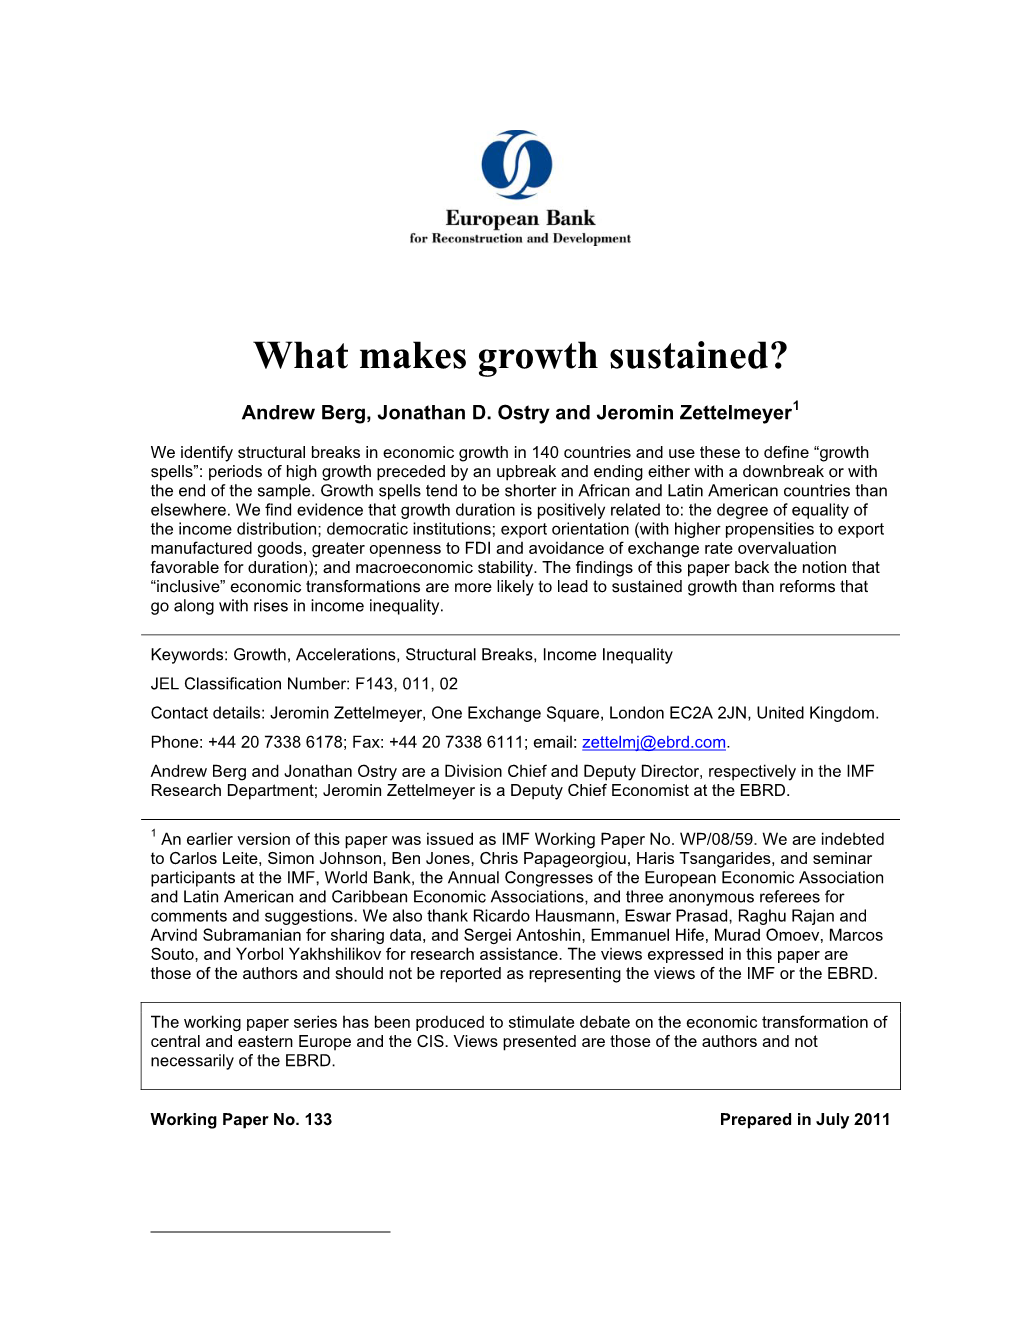 What Makes Growth Sustained?